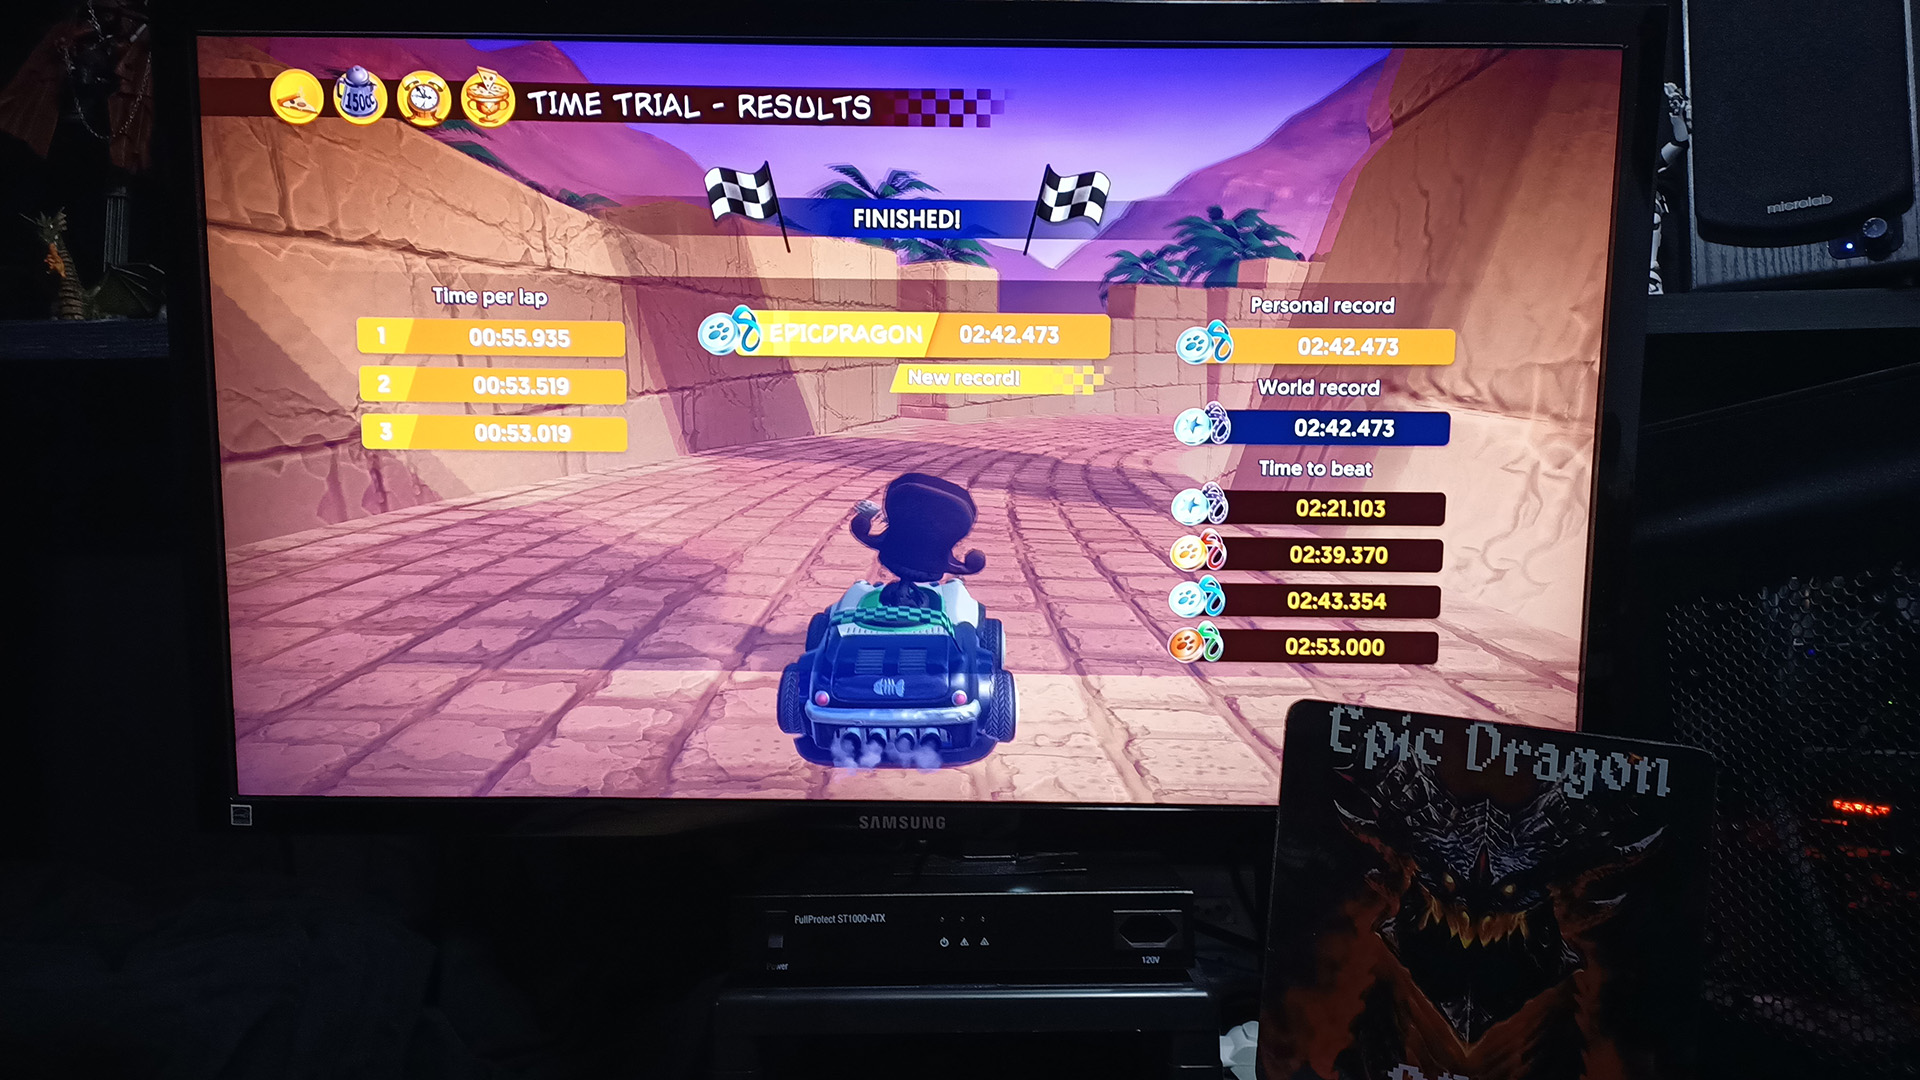 Garfield Kart Furious Racing: Valley Of The Kings [Time Trial: Lap Time] time of 0:00:53.019